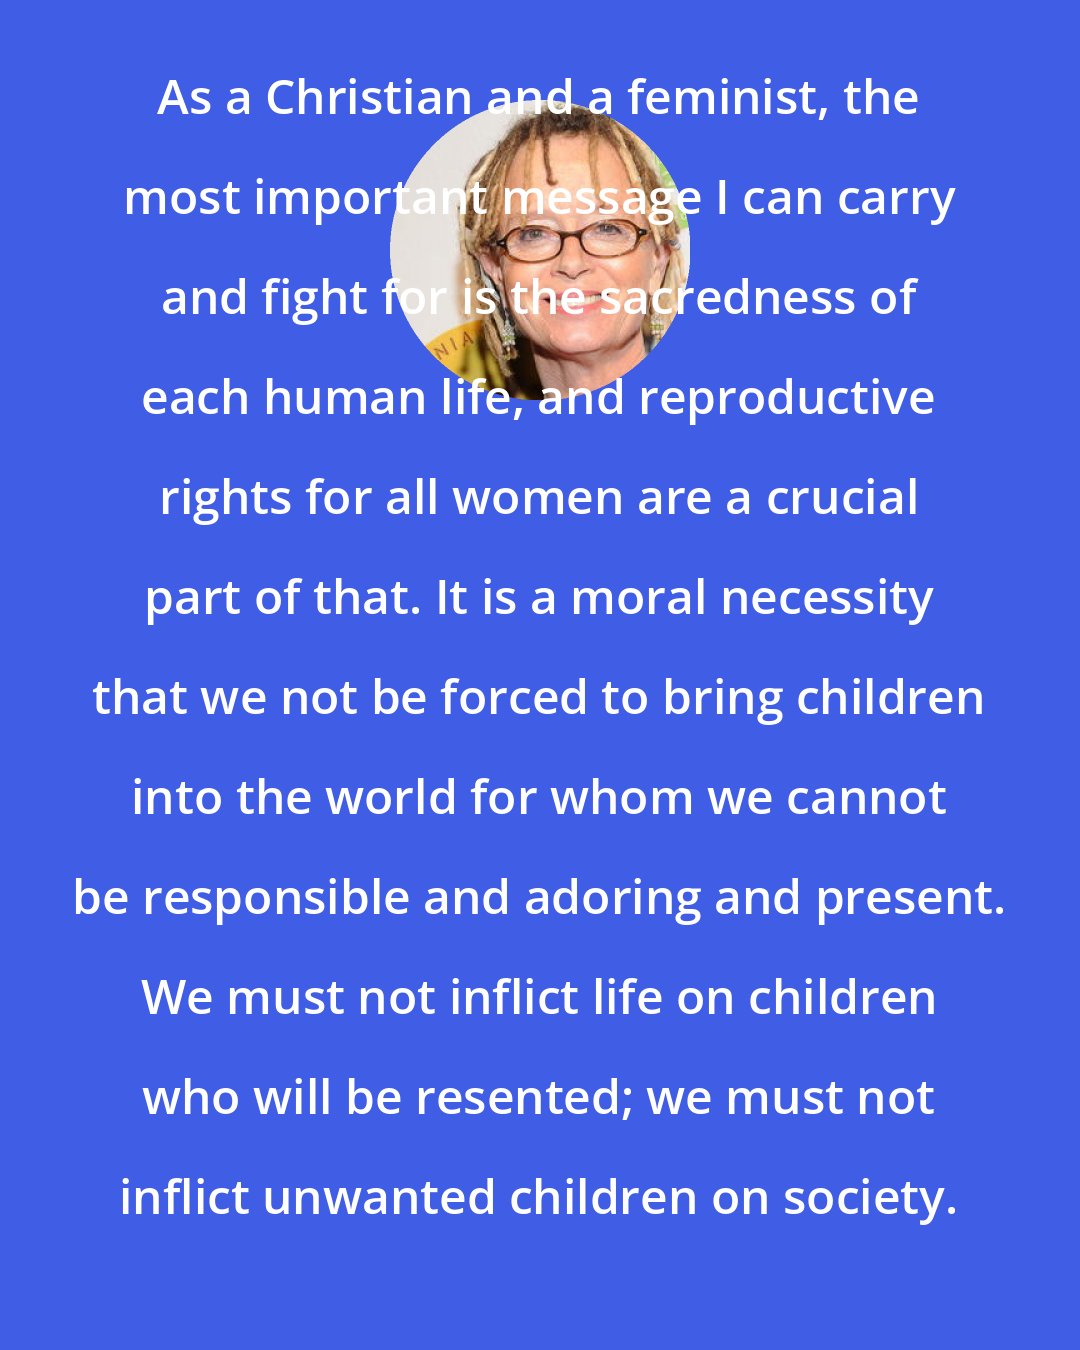 Anne Lamott: As a Christian and a feminist, the most important message I can carry and fight for is the sacredness of each human life, and reproductive rights for all women are a crucial part of that. It is a moral necessity that we not be forced to bring children into the world for whom we cannot be responsible and adoring and present. We must not inflict life on children who will be resented; we must not inflict unwanted children on society.